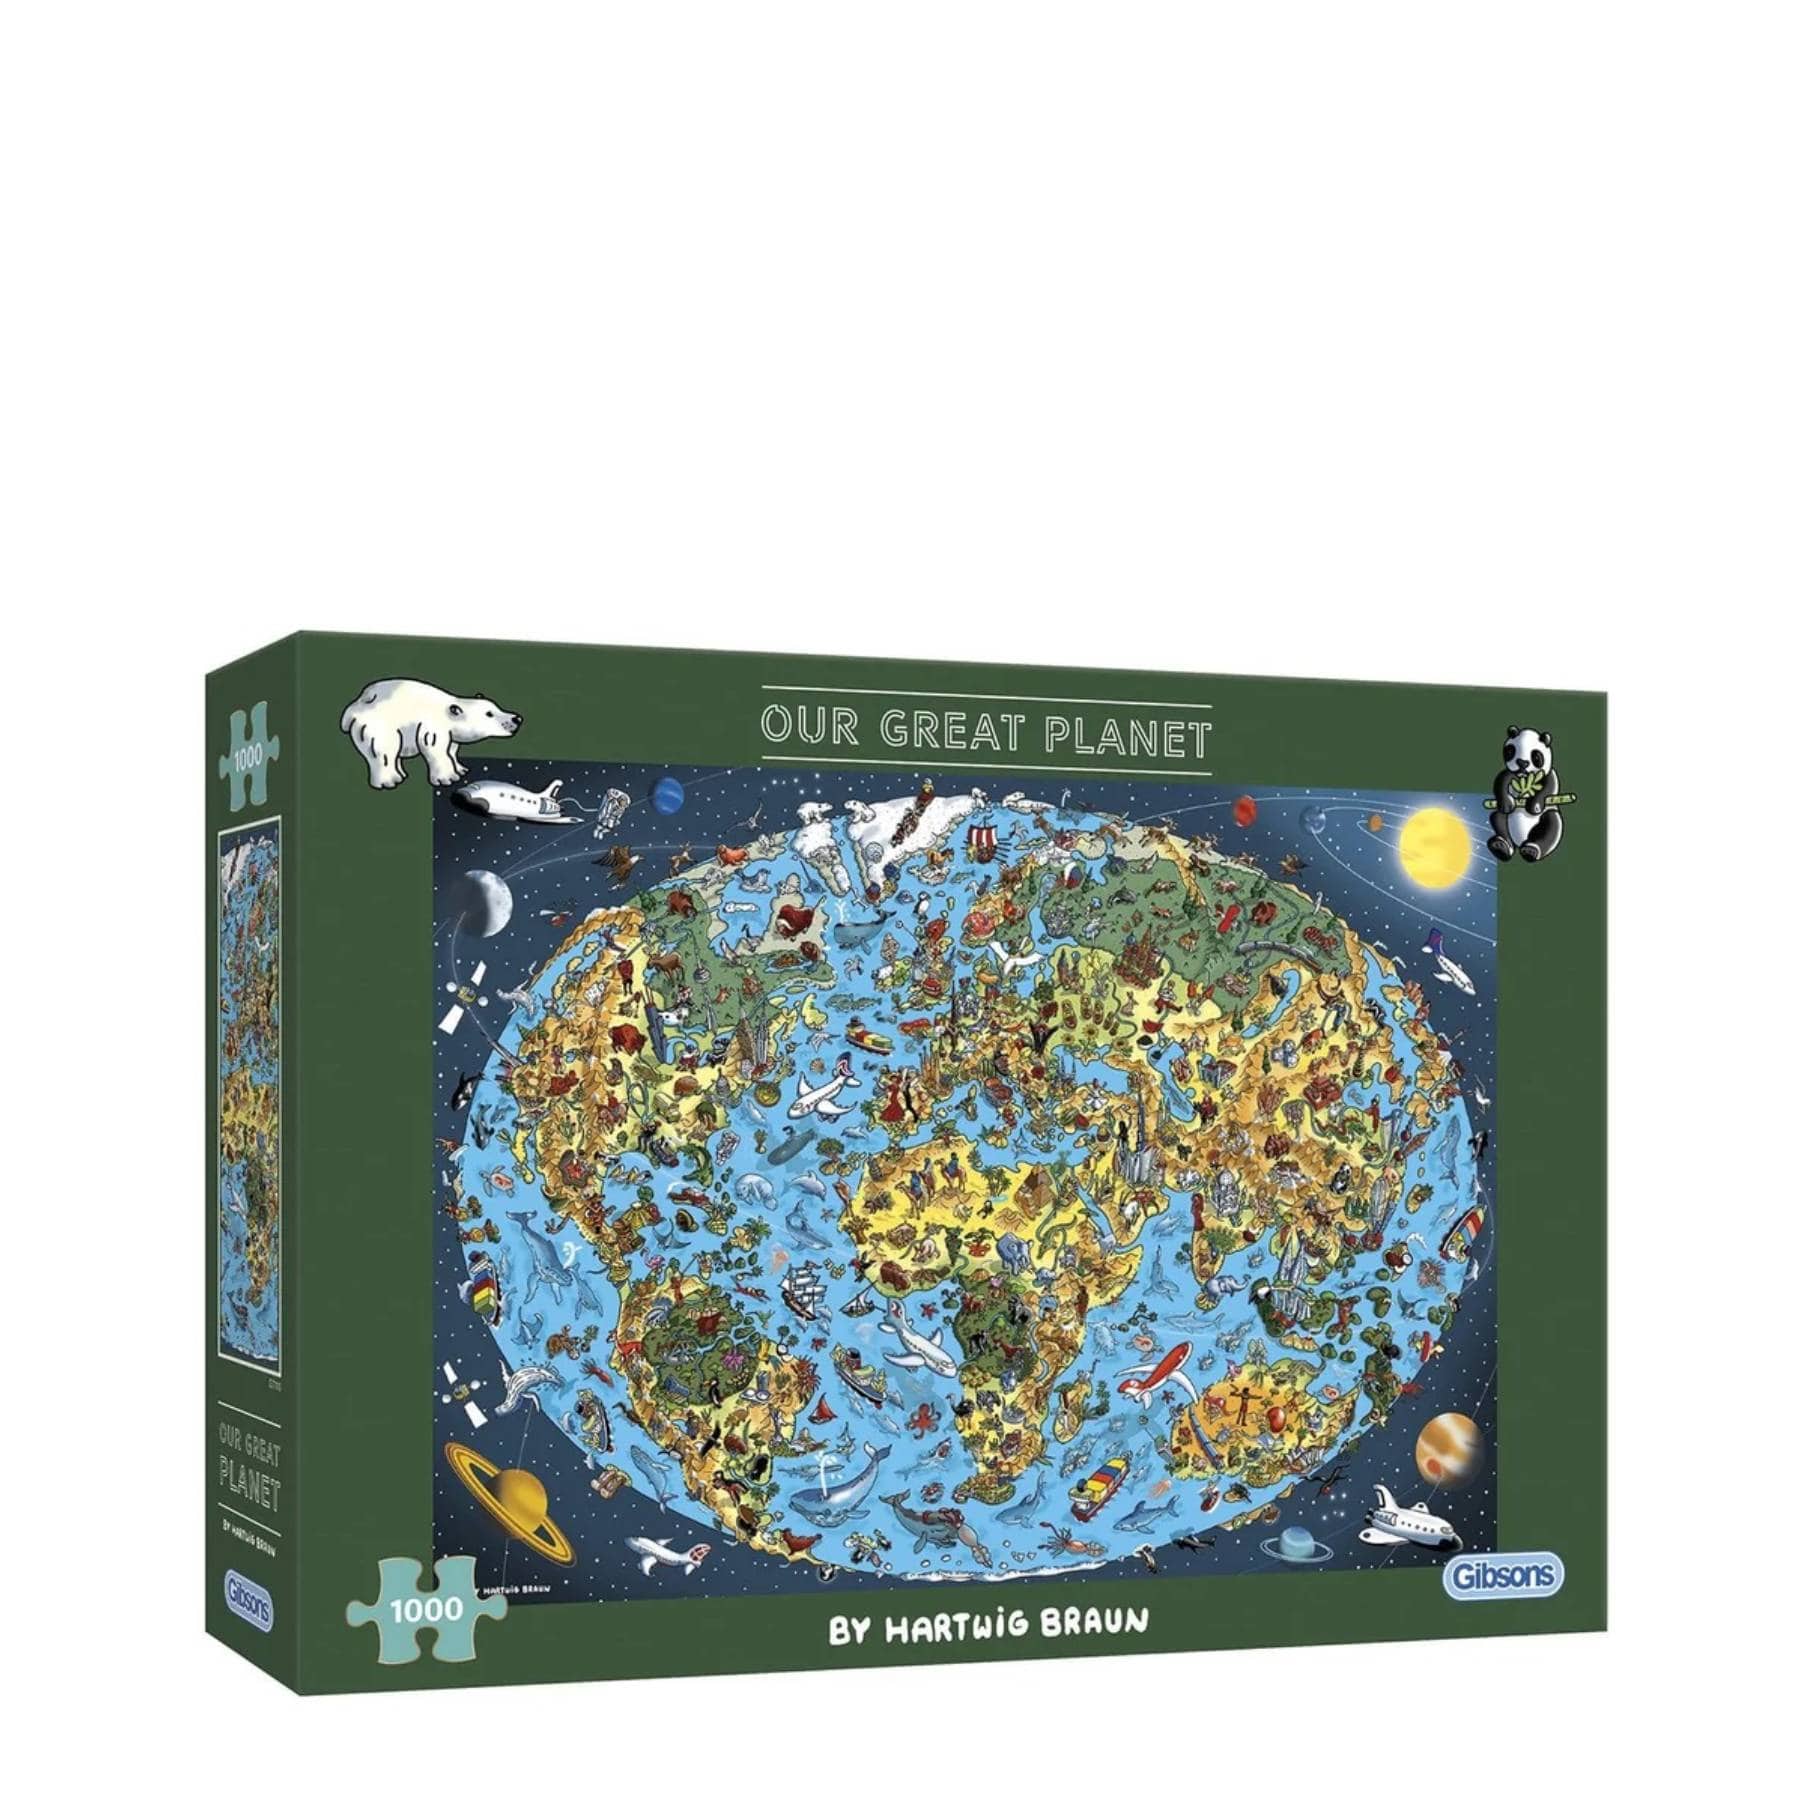 Our great planet 100 piece jigsaw puzzle